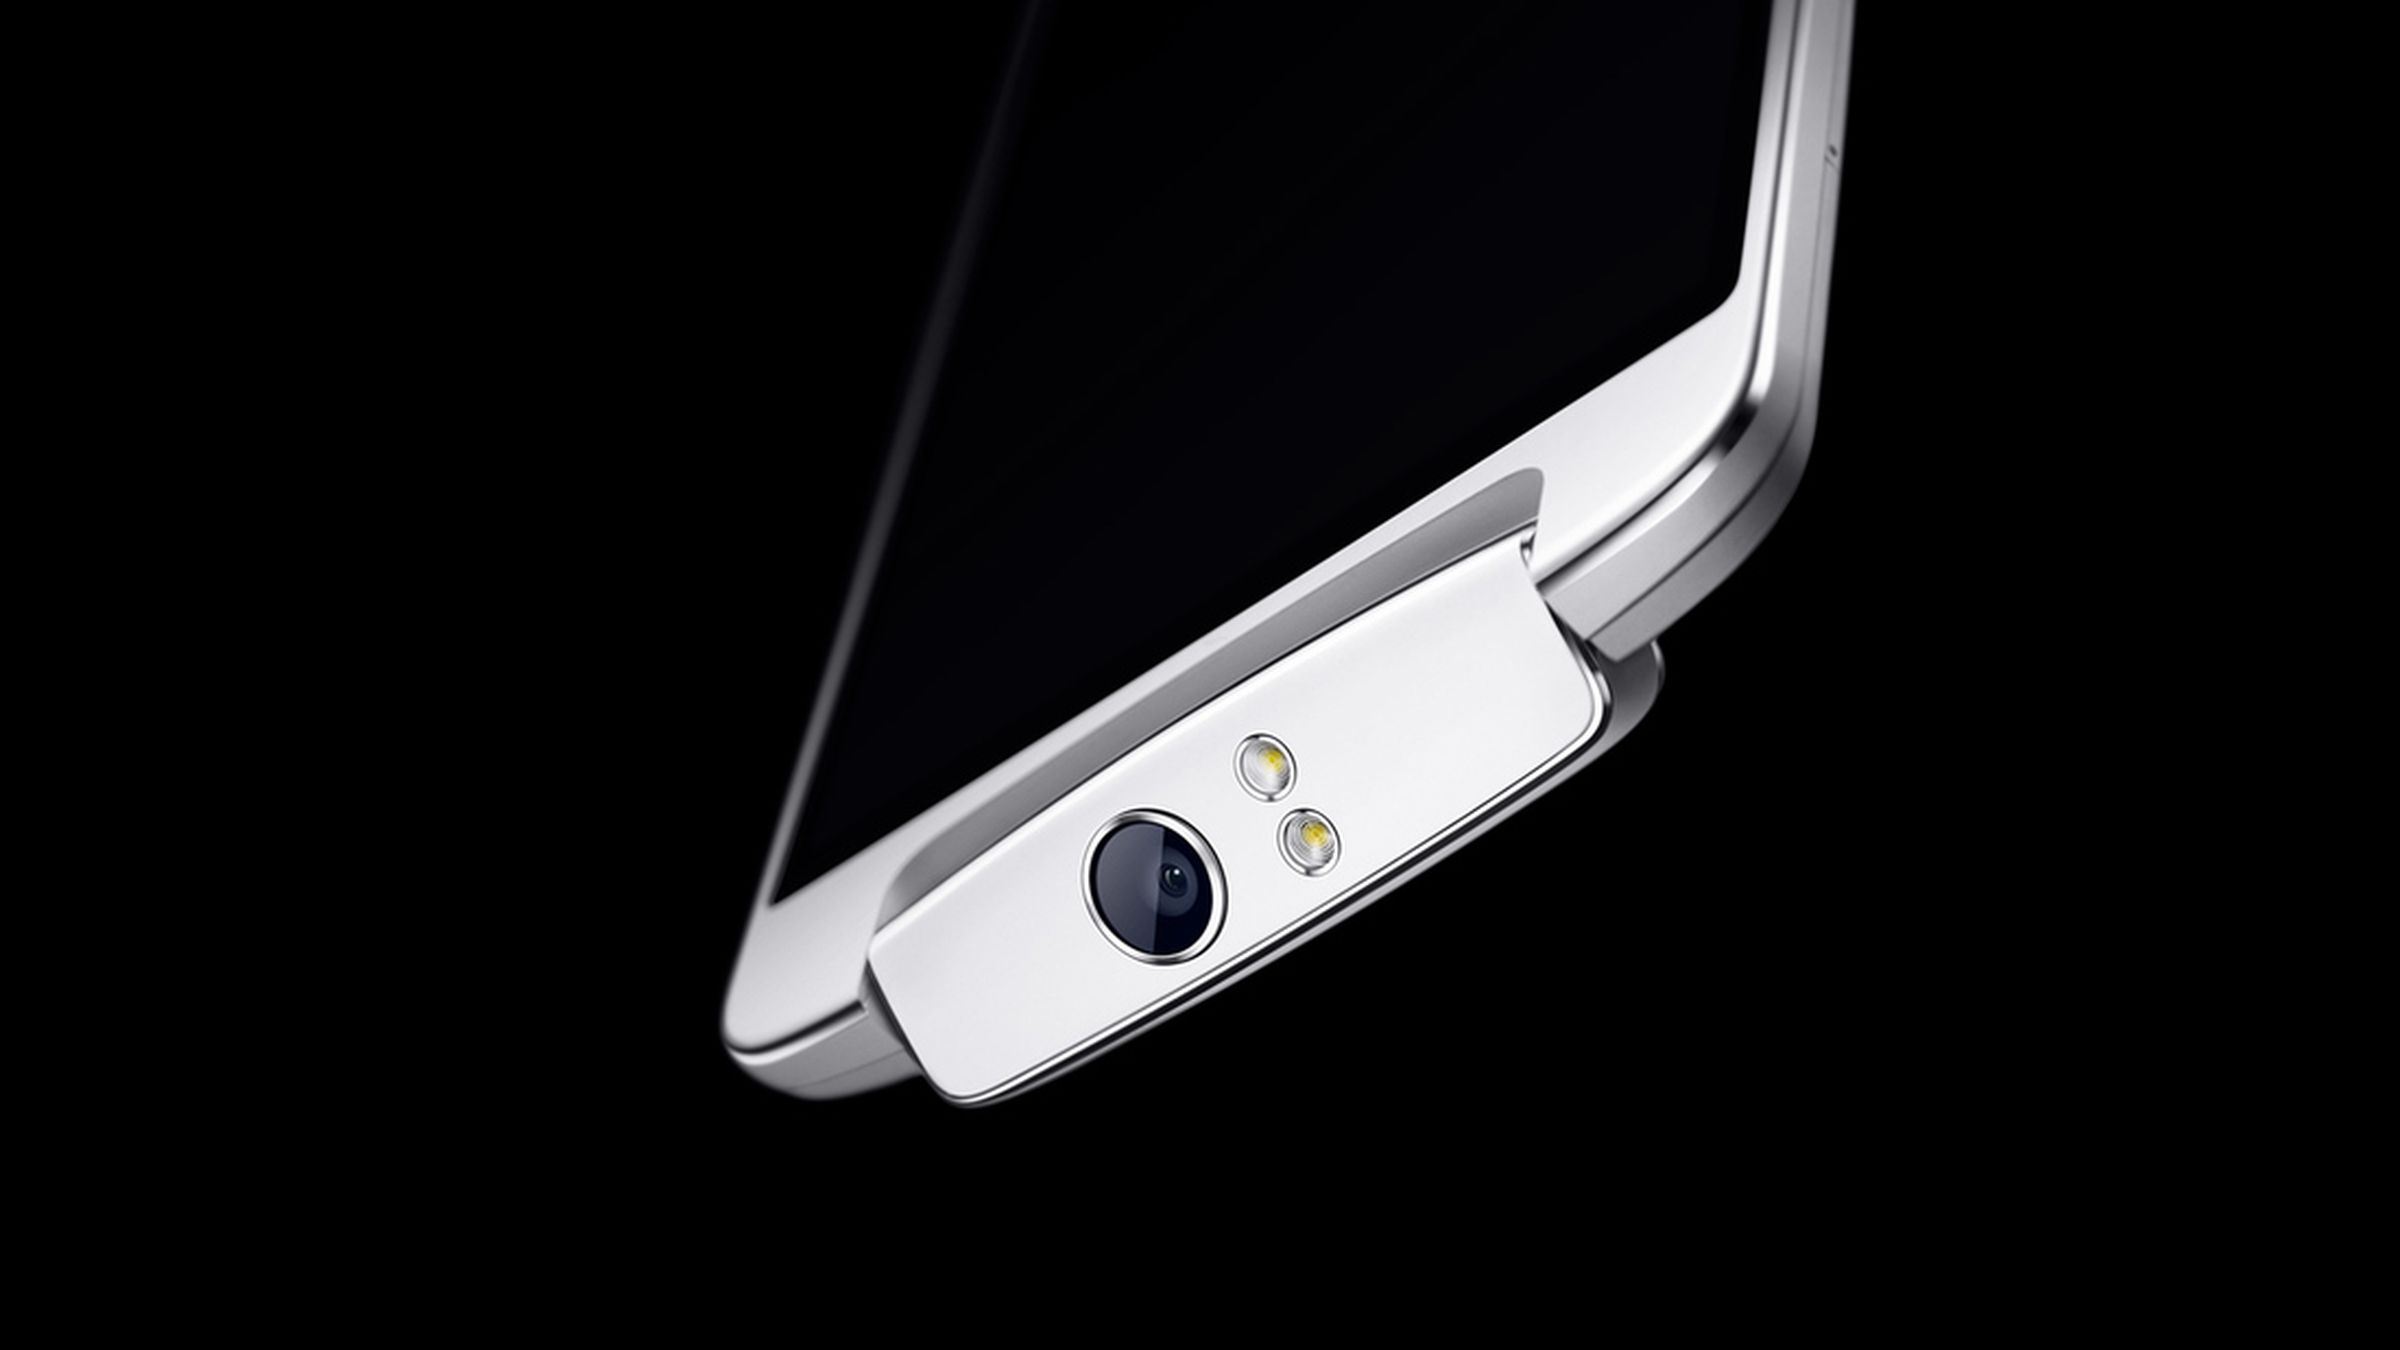 Oppo N1 press images